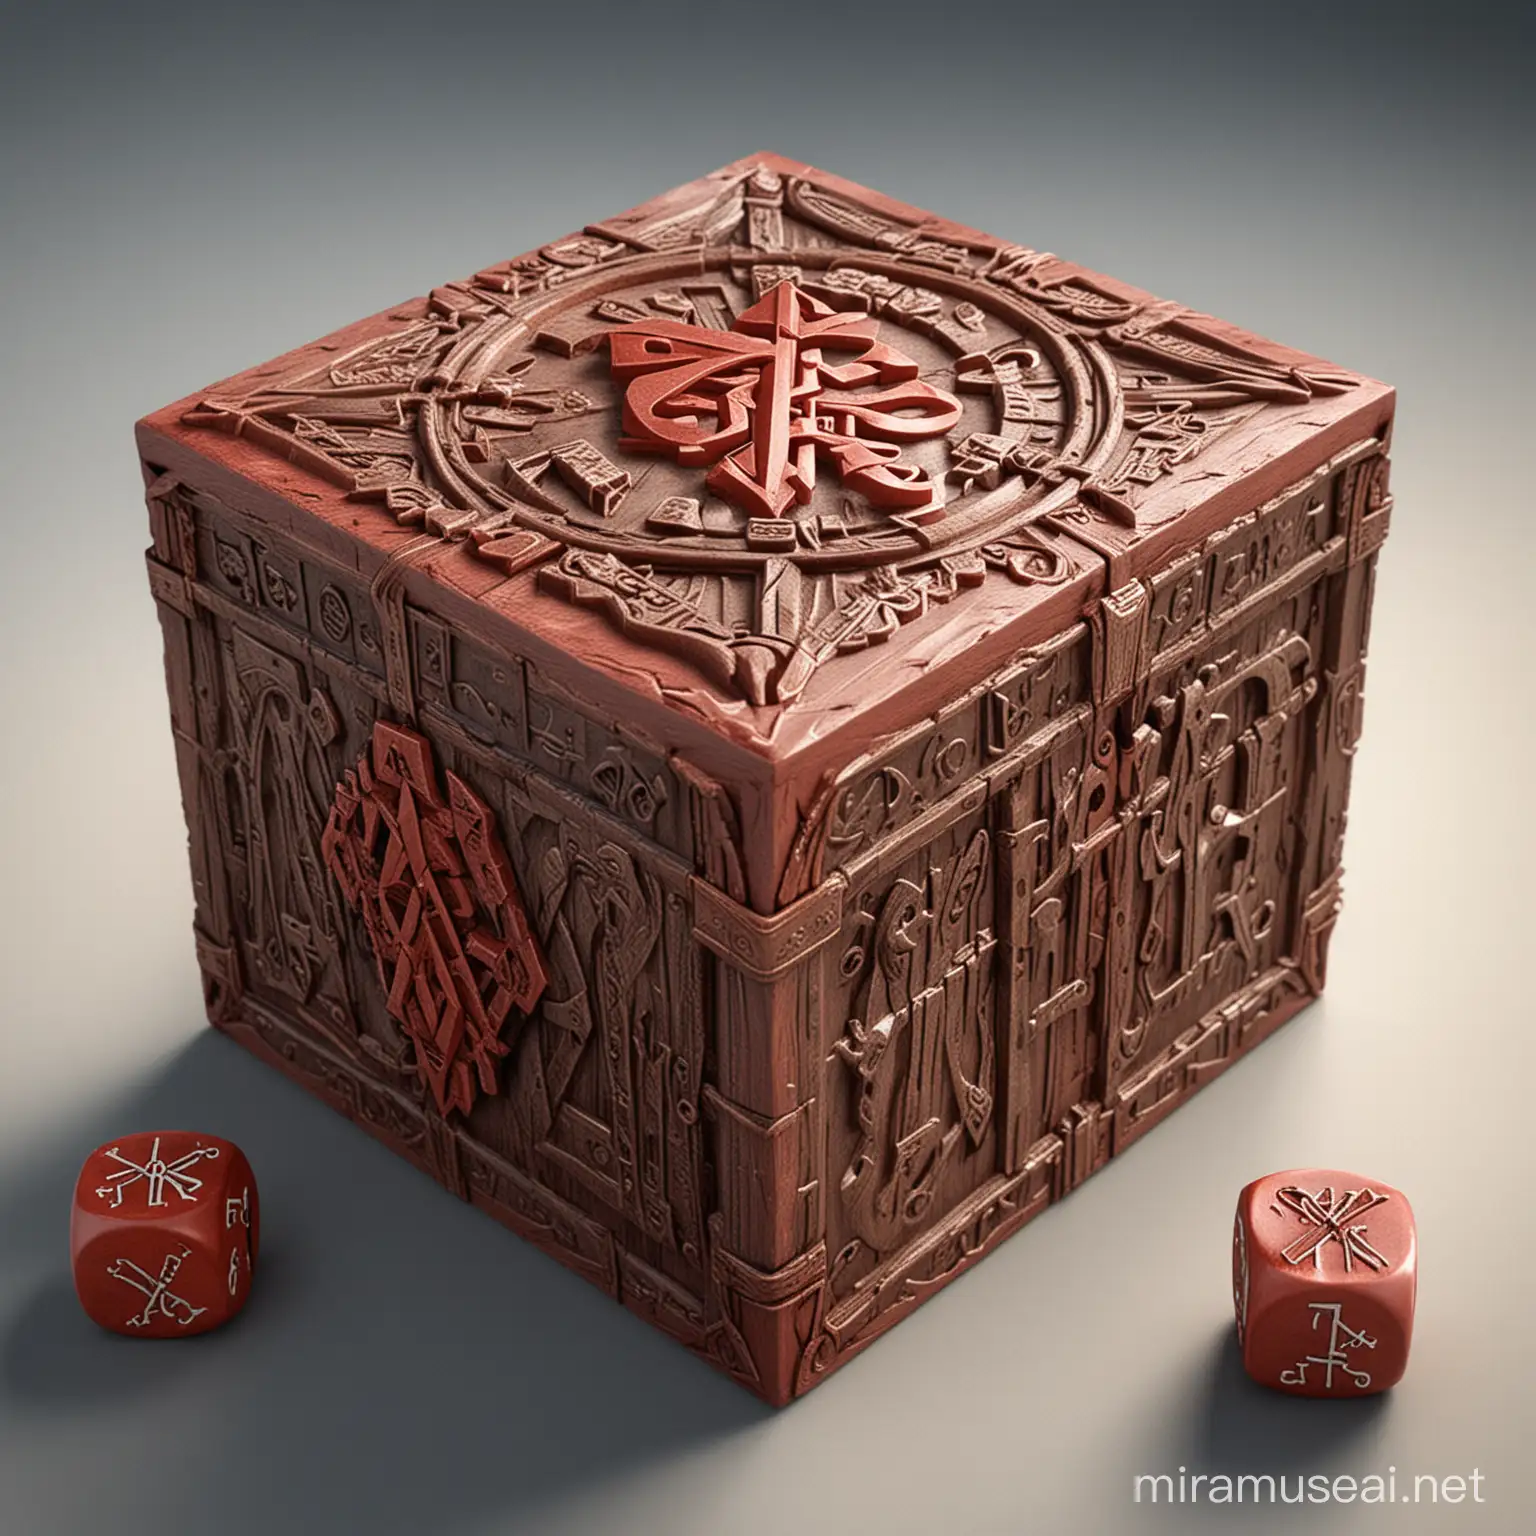 Red 3D Dice Gift Box with HalfOpen Lid Inspired by Gaming World